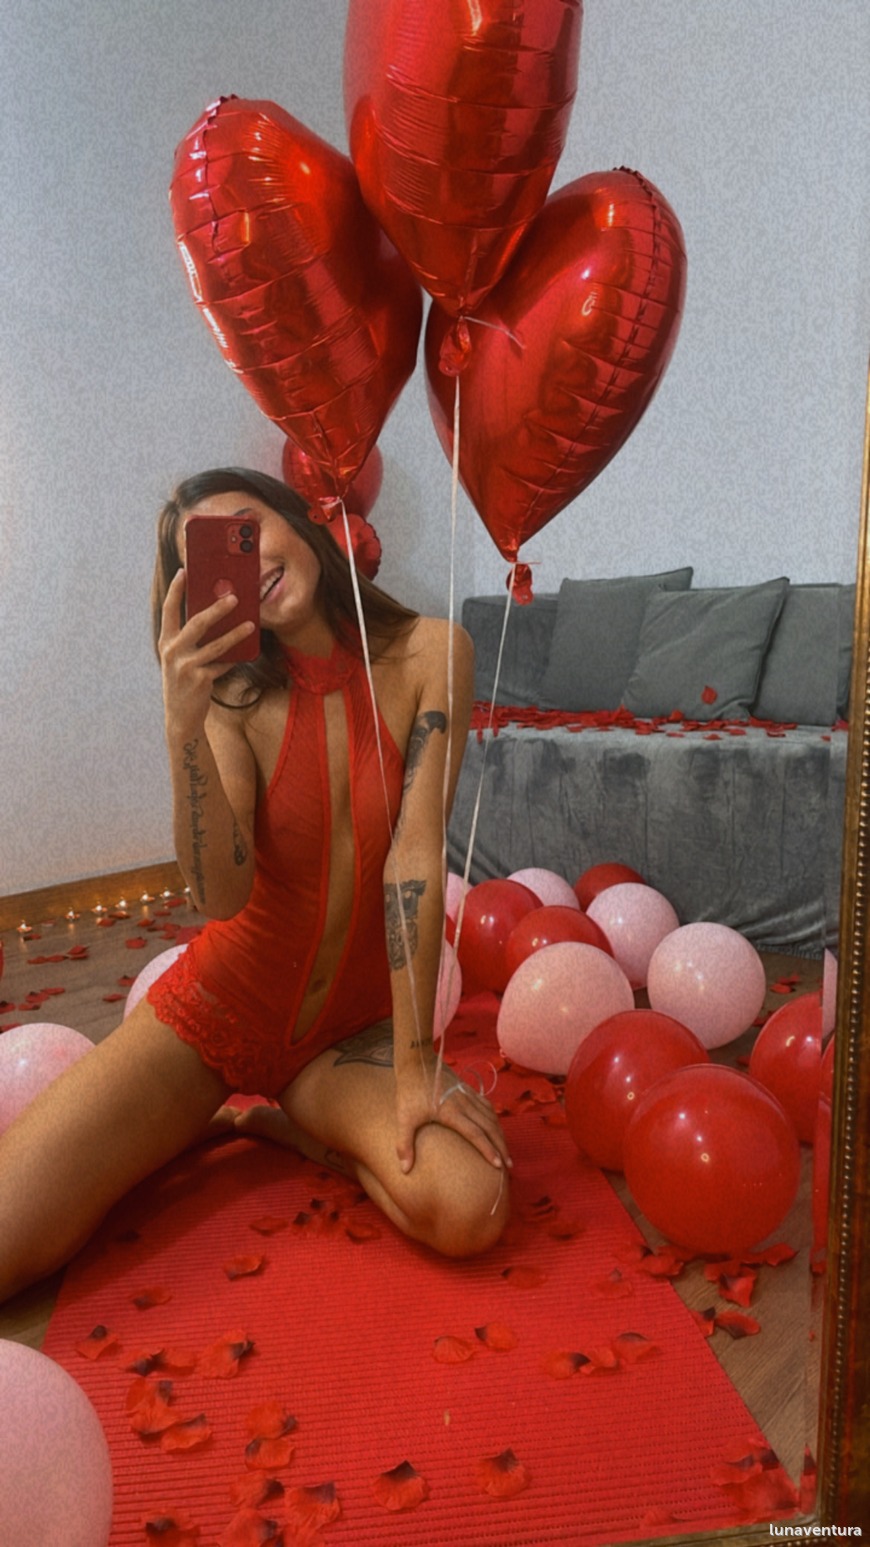 Roses are red, the sky is blue, and my Valentine content is waiting for you ðŸ’– Happy Valentine's Day to all my lovely fans! Come and spend this special day with me on my DMs ðŸ”¥ 1